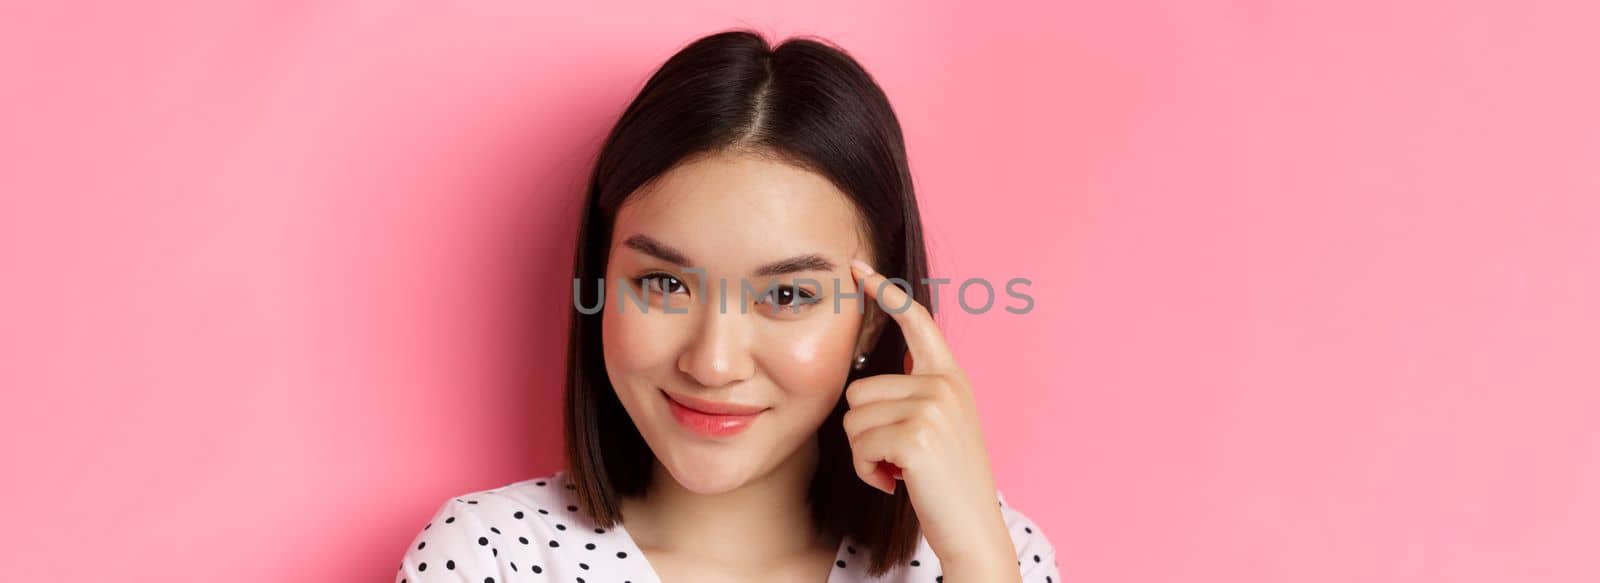 Beauty and skin care concept. Headshot of smart asian woman pointing at head and smiling sly, asking to think, standing over pink background.